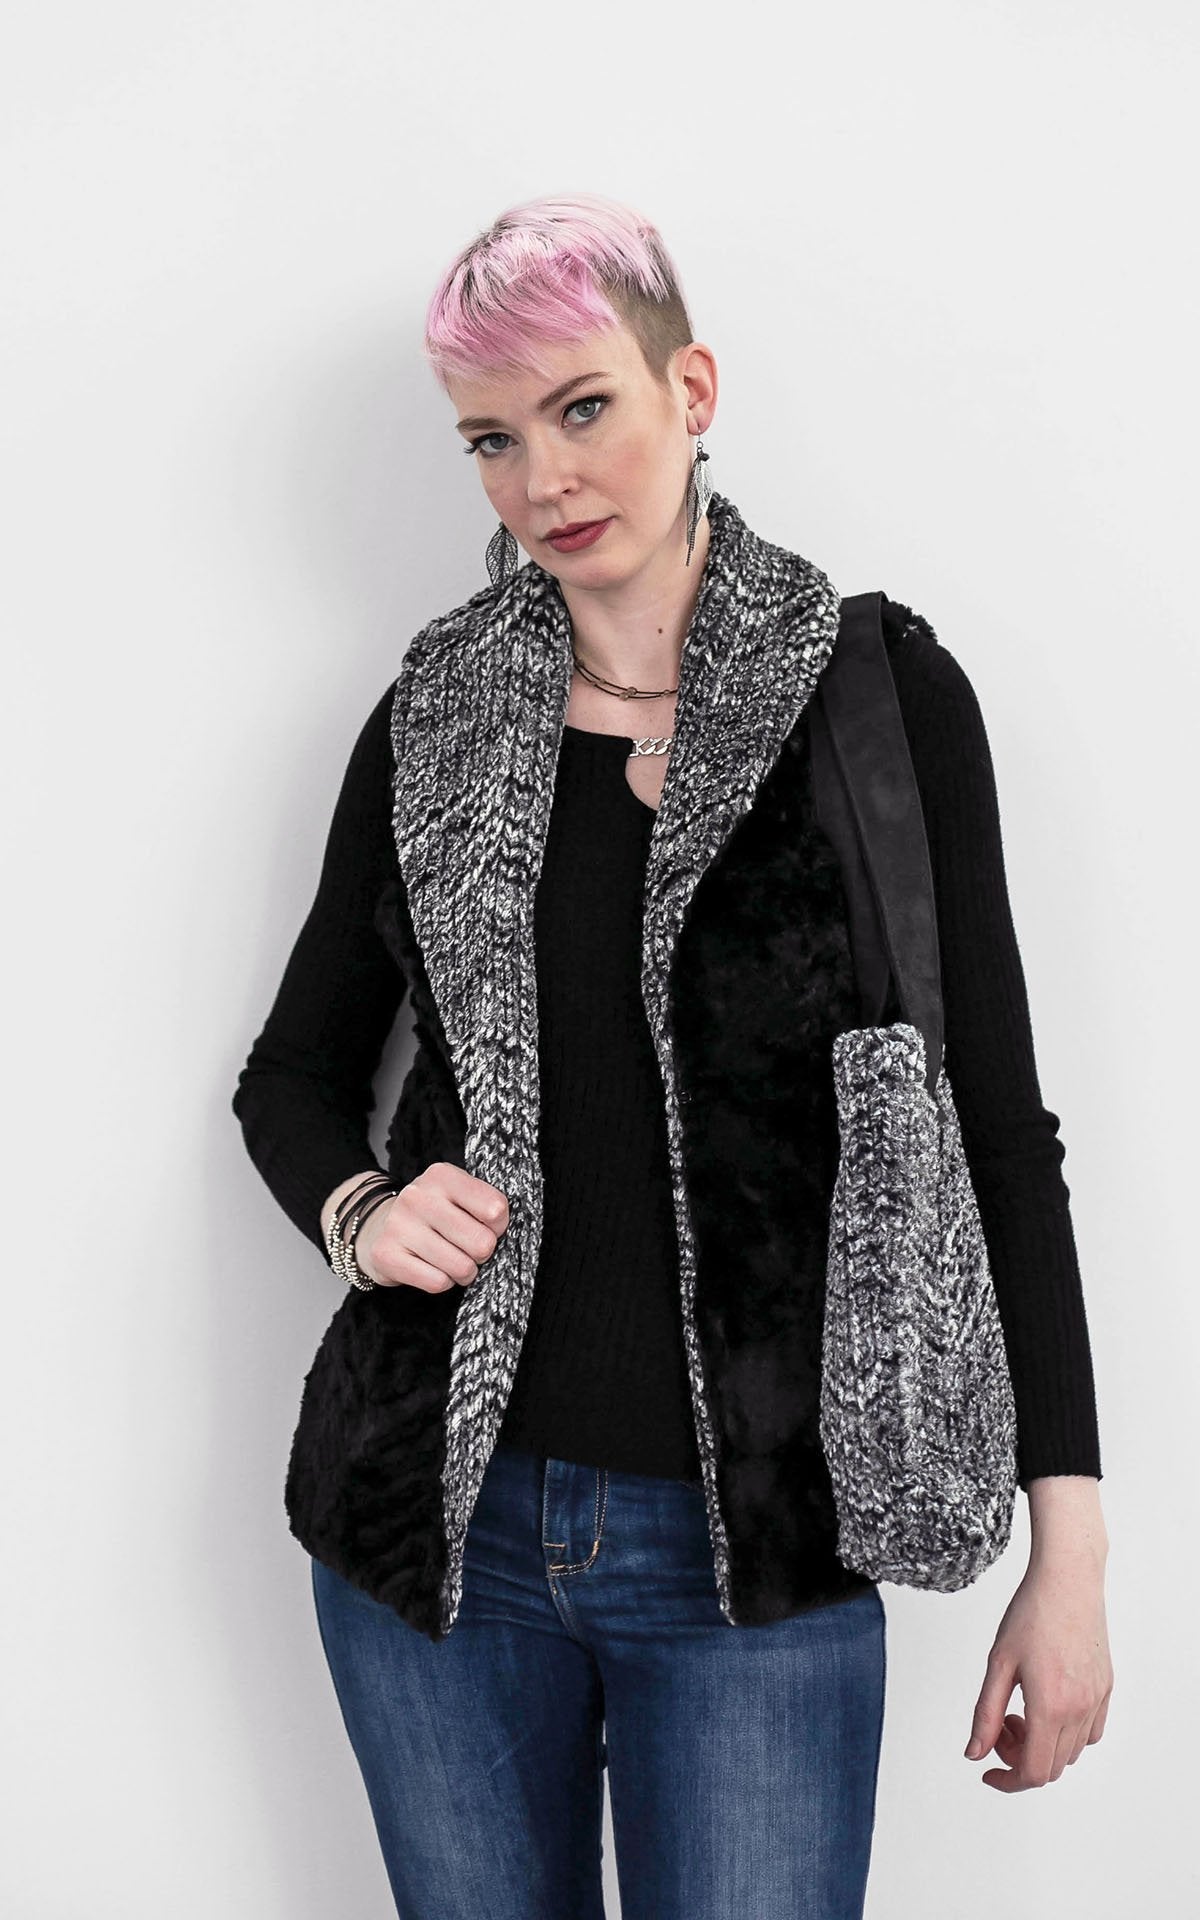 Model in Shawl Collar Vest and Matching Toyoko Tote | Cozy Cable in Ash Black and White with Cuddly Black Faux Fur | Handmade In Seattle WA | Pandemonium Millinery